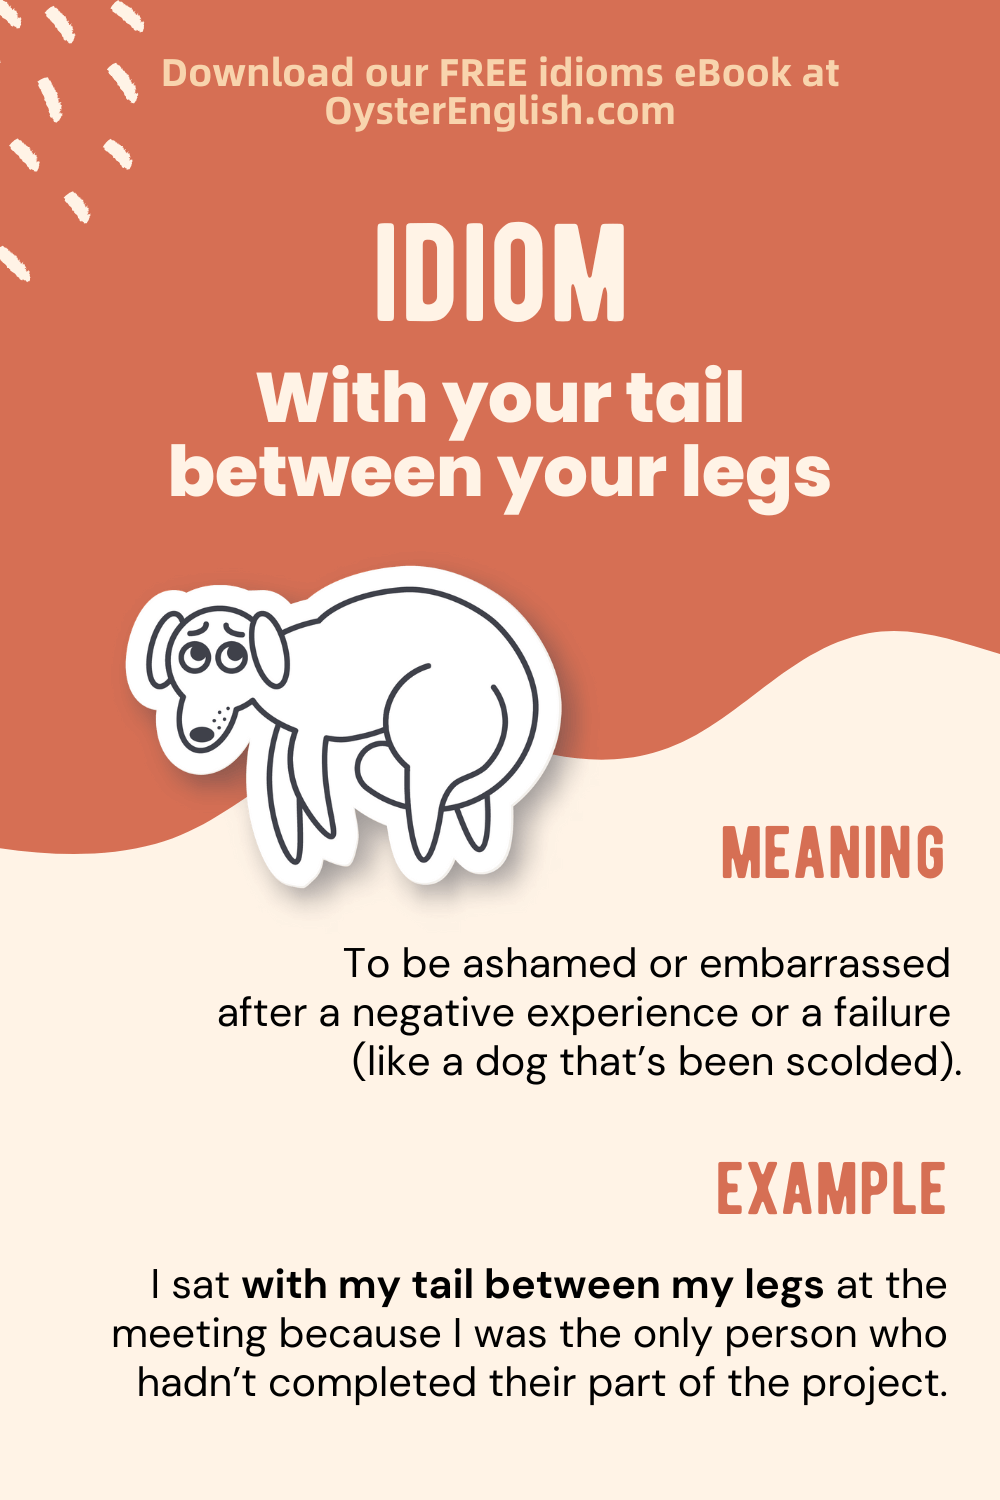 Idiom: With one's tail between one's legs (meaning & examples)